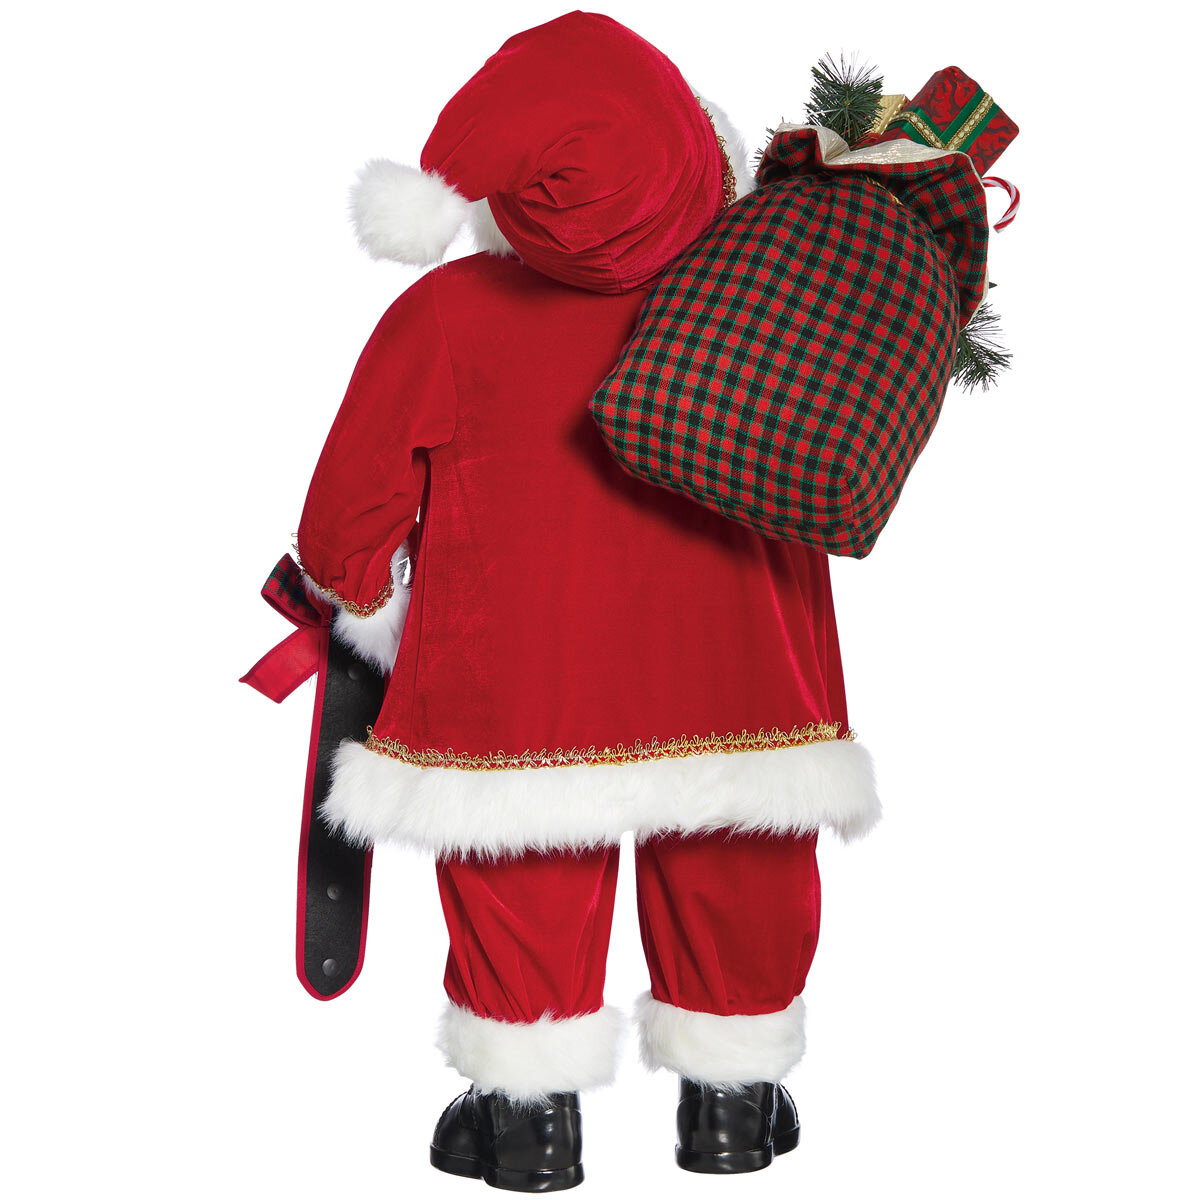 Buy 36" Fabric Santa Overview Image at Costco.co.uk